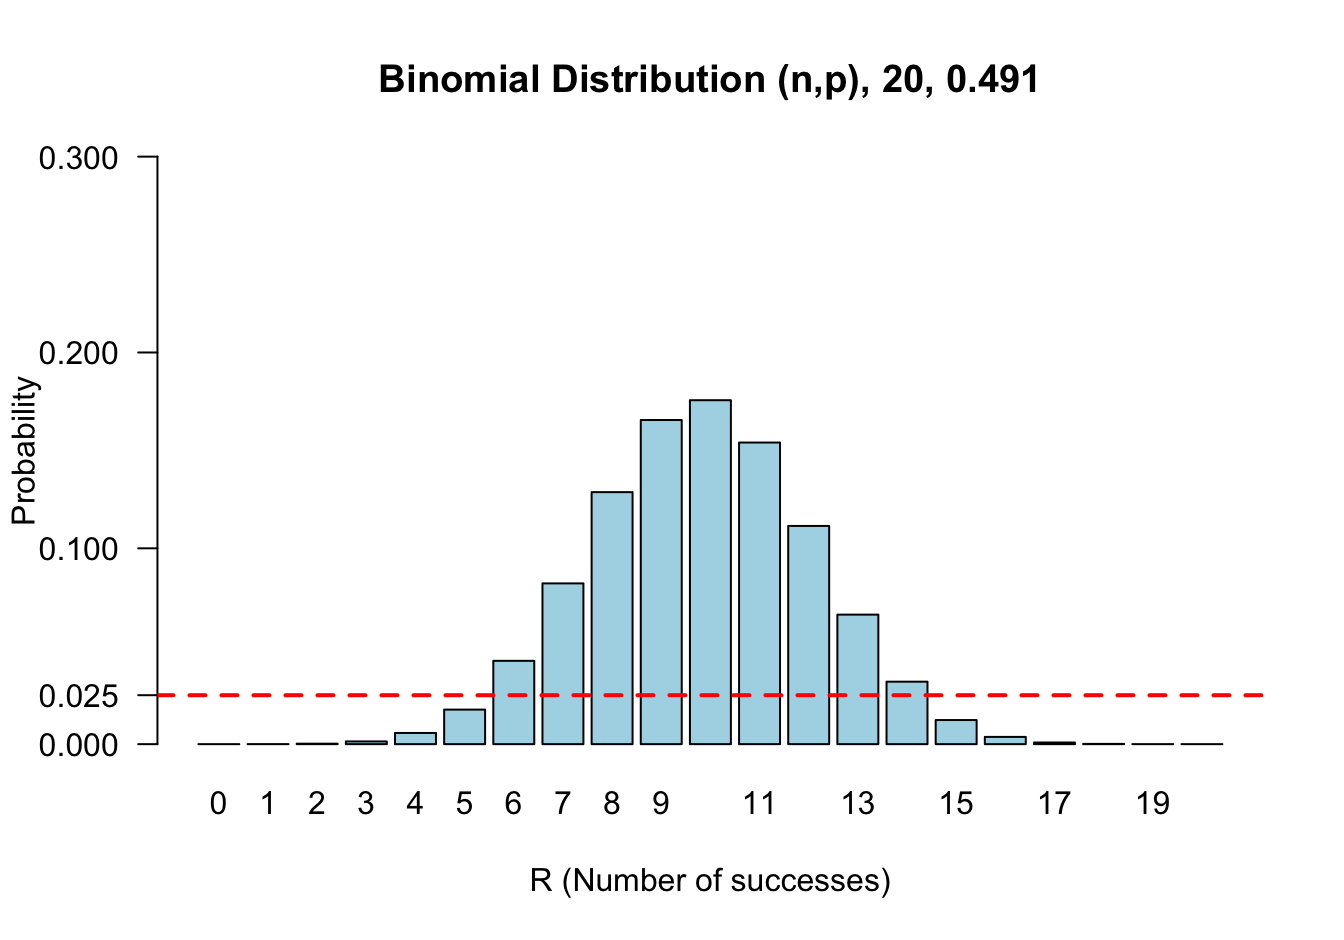 Sampling distribution of number of successes out of 20 (R) conditional on the probability of success being 0.4910